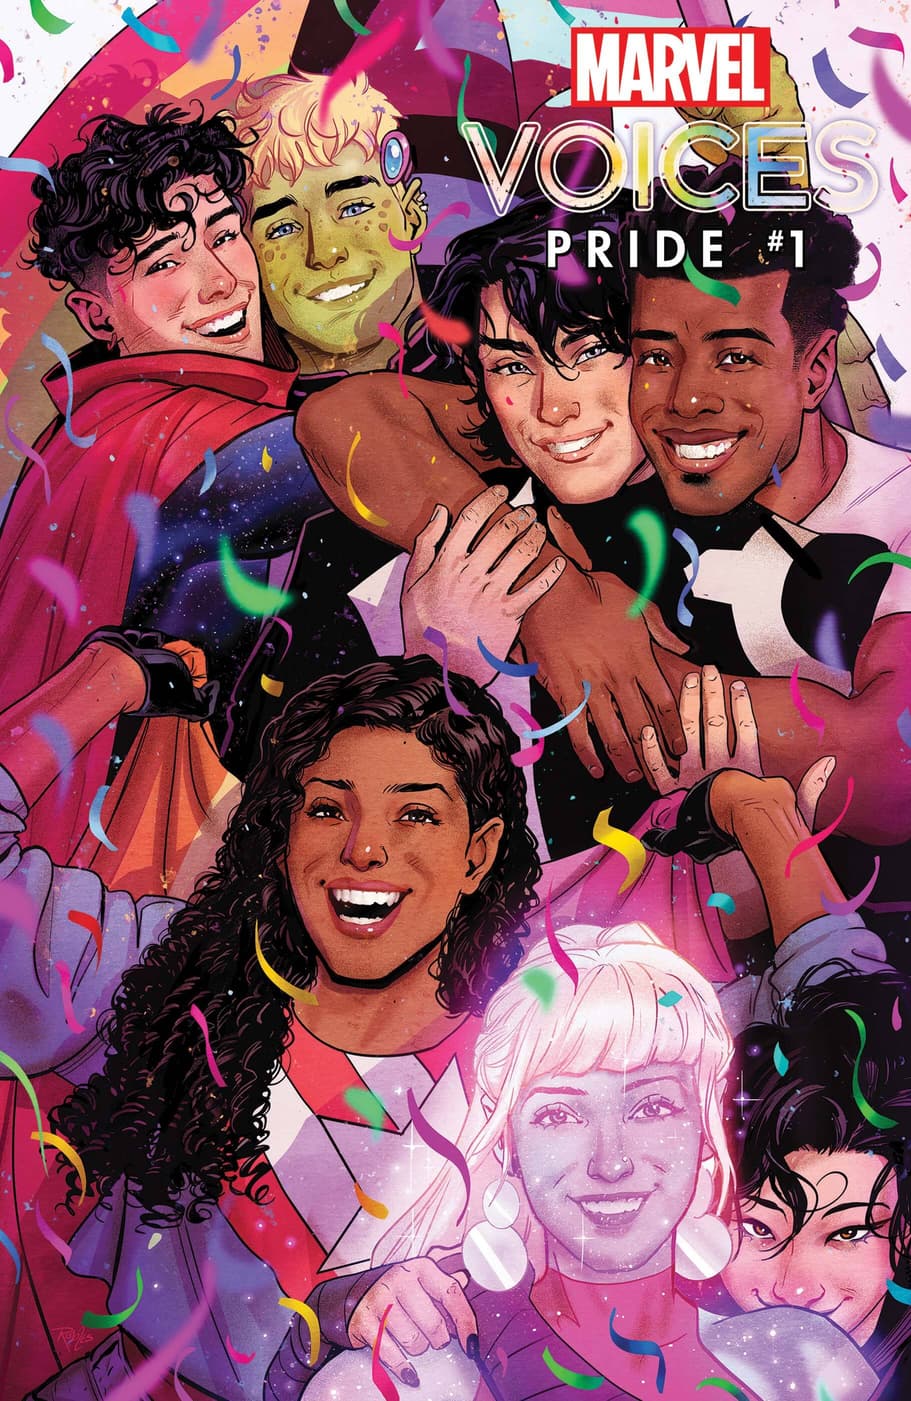 MARVEL'S VOICES: PRIDE #1 cover by Nick Robles